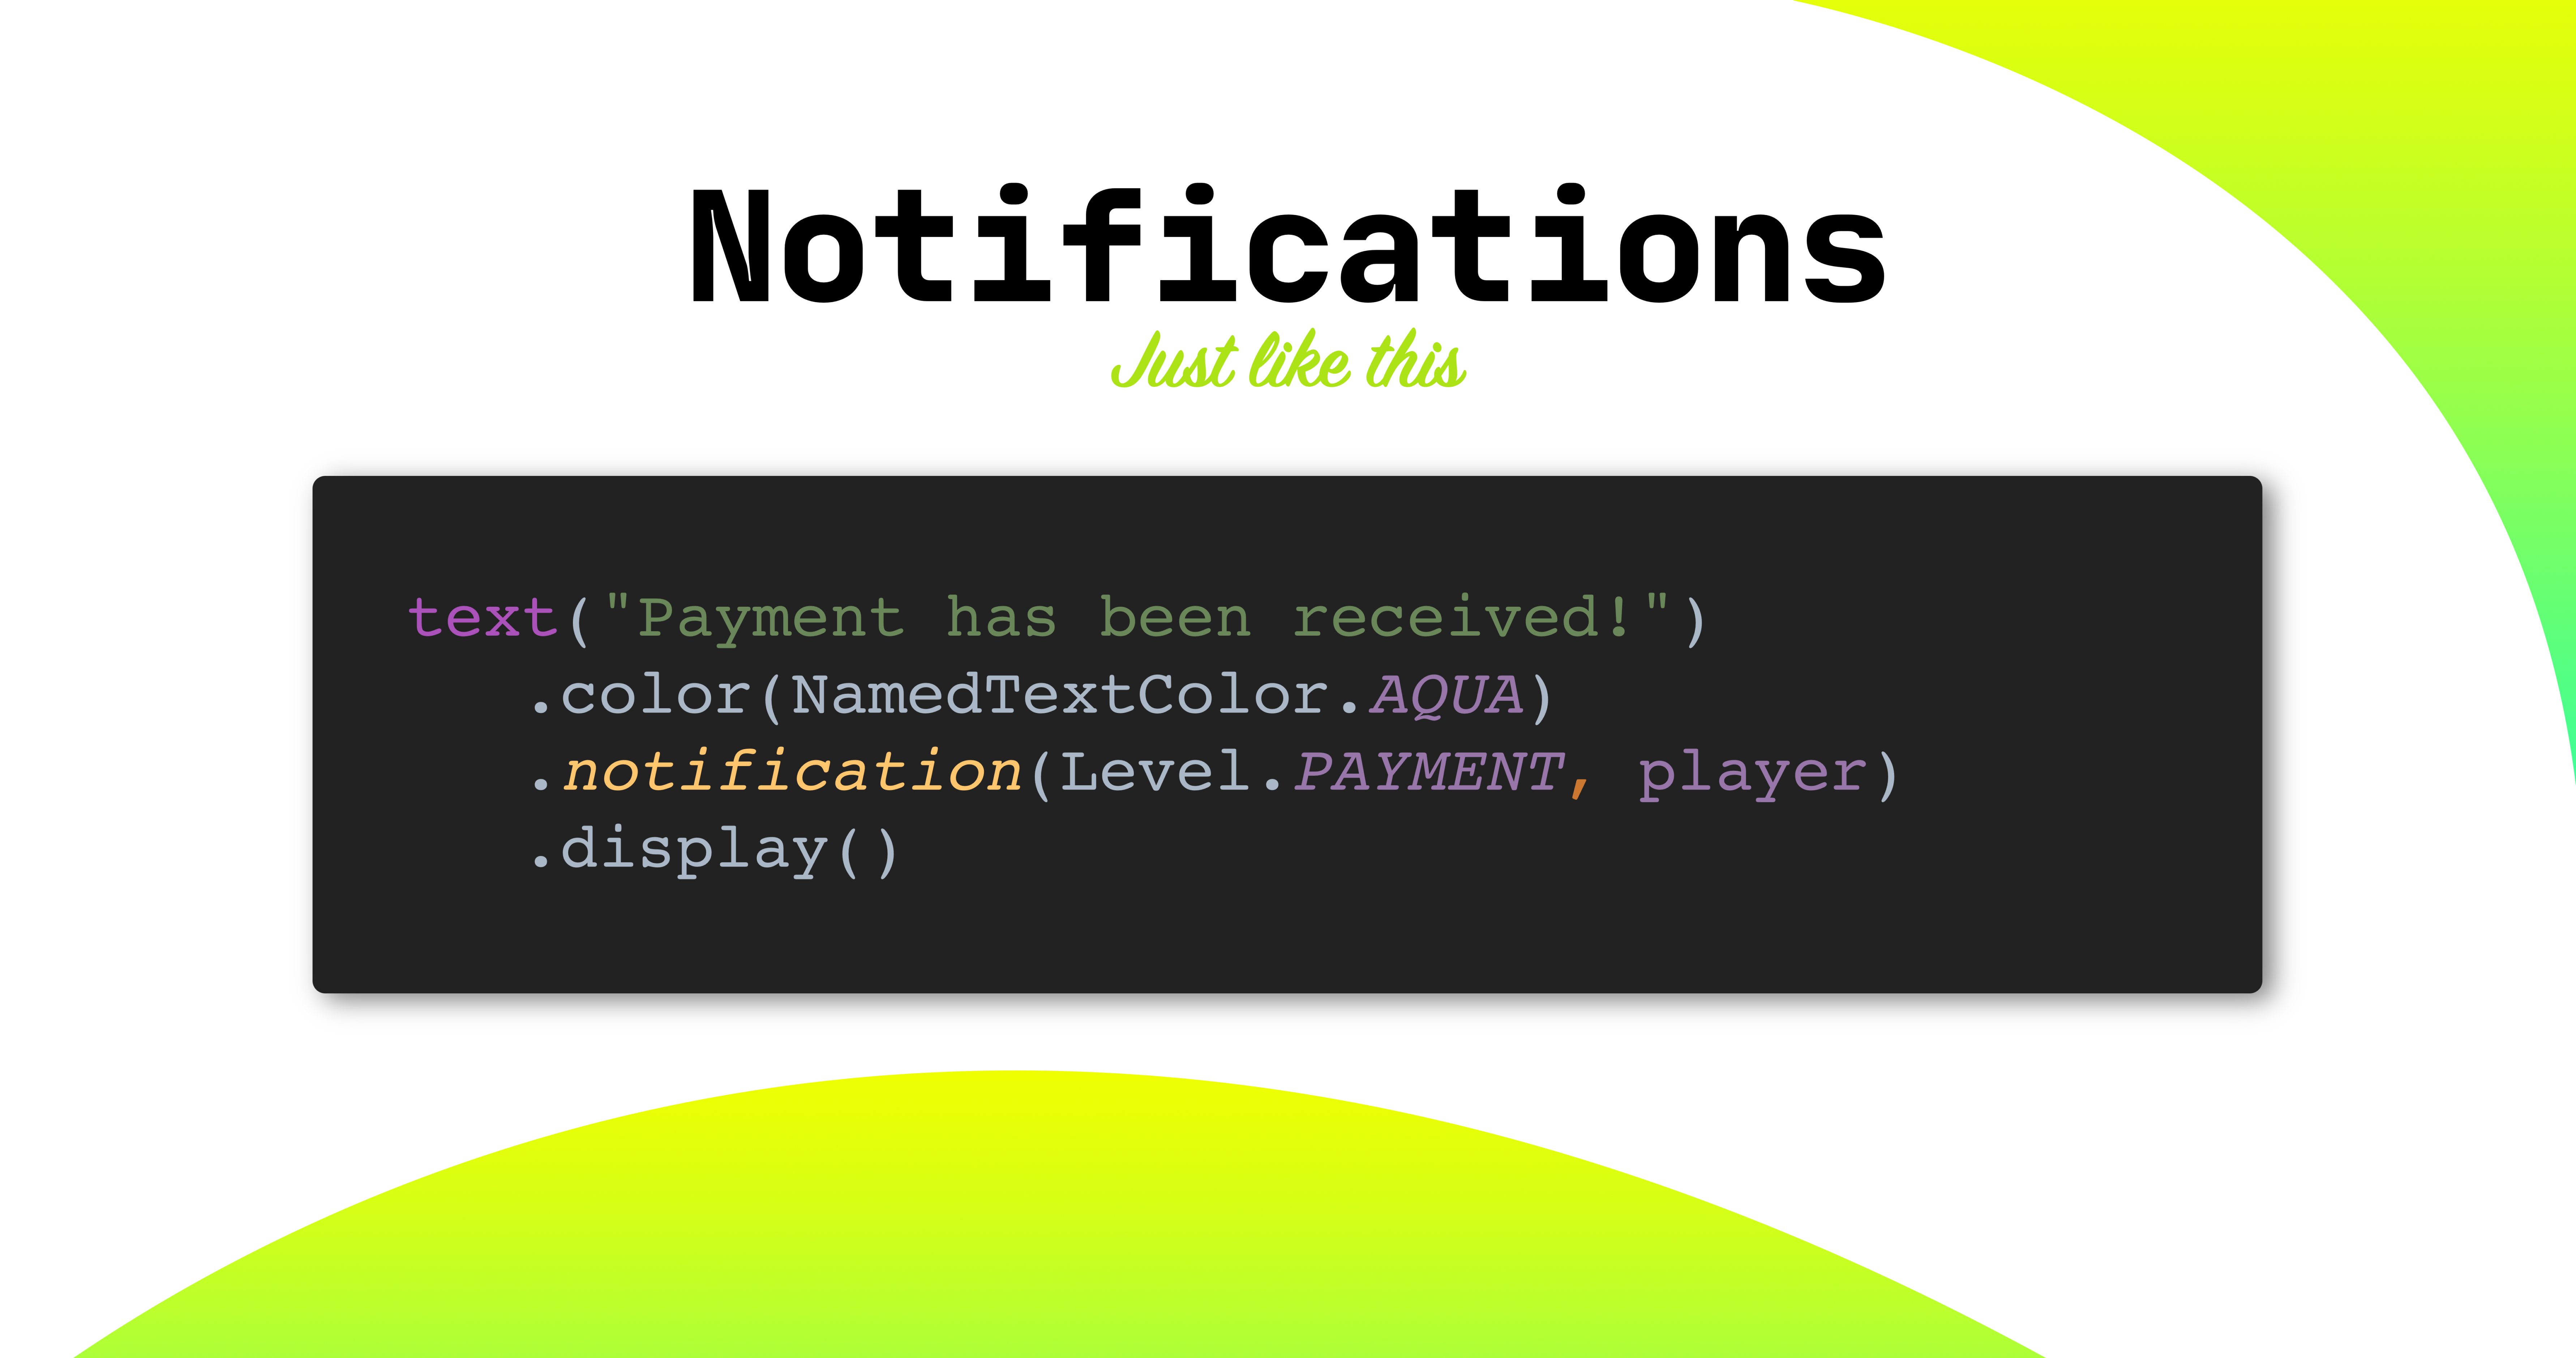 Notifications - Just like this